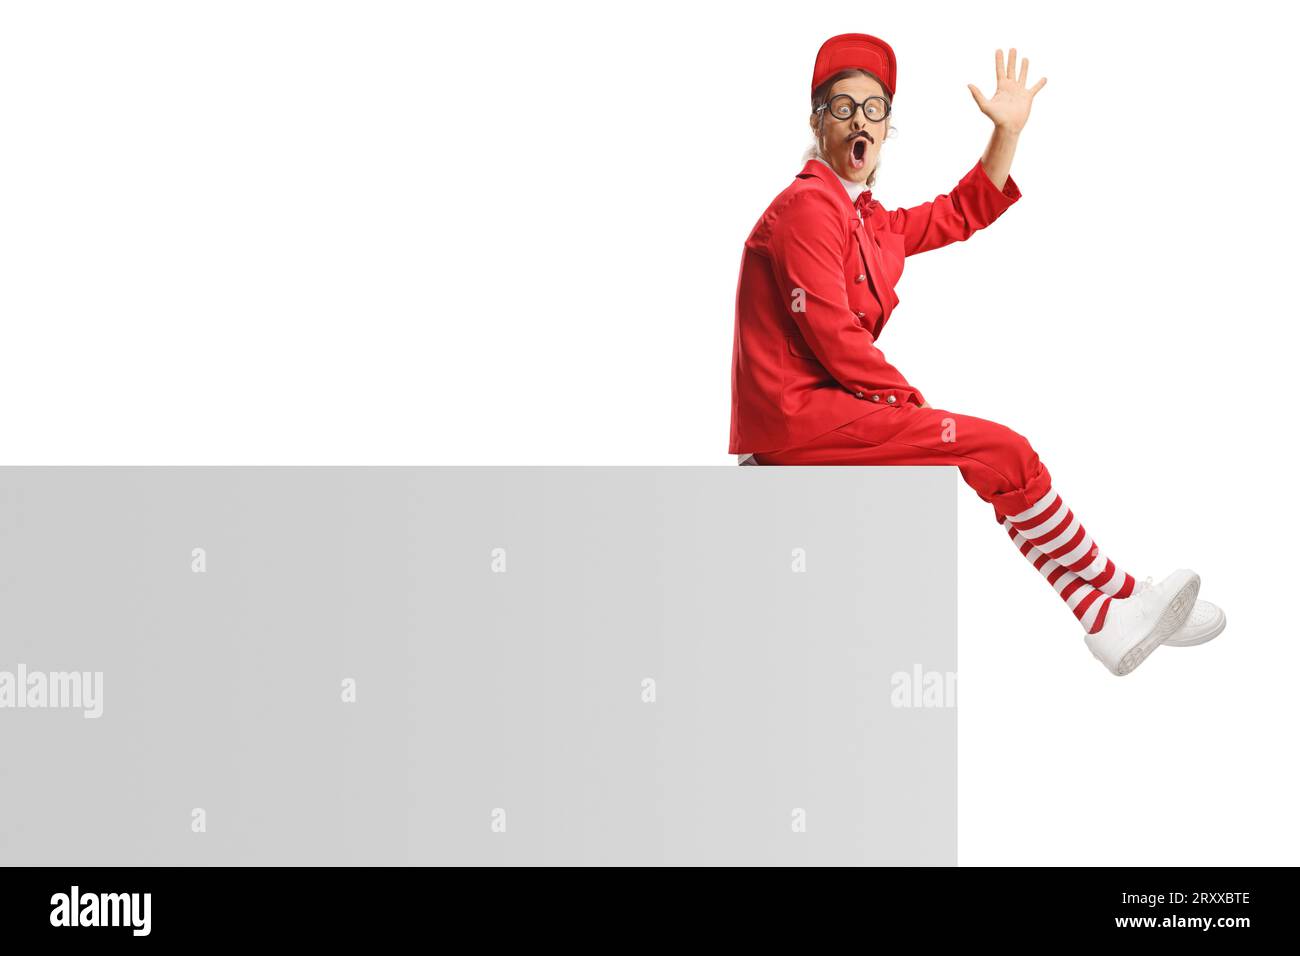 Funny entertainer in a red suit sitting on a wall and waving isolated on white background Stock Photo